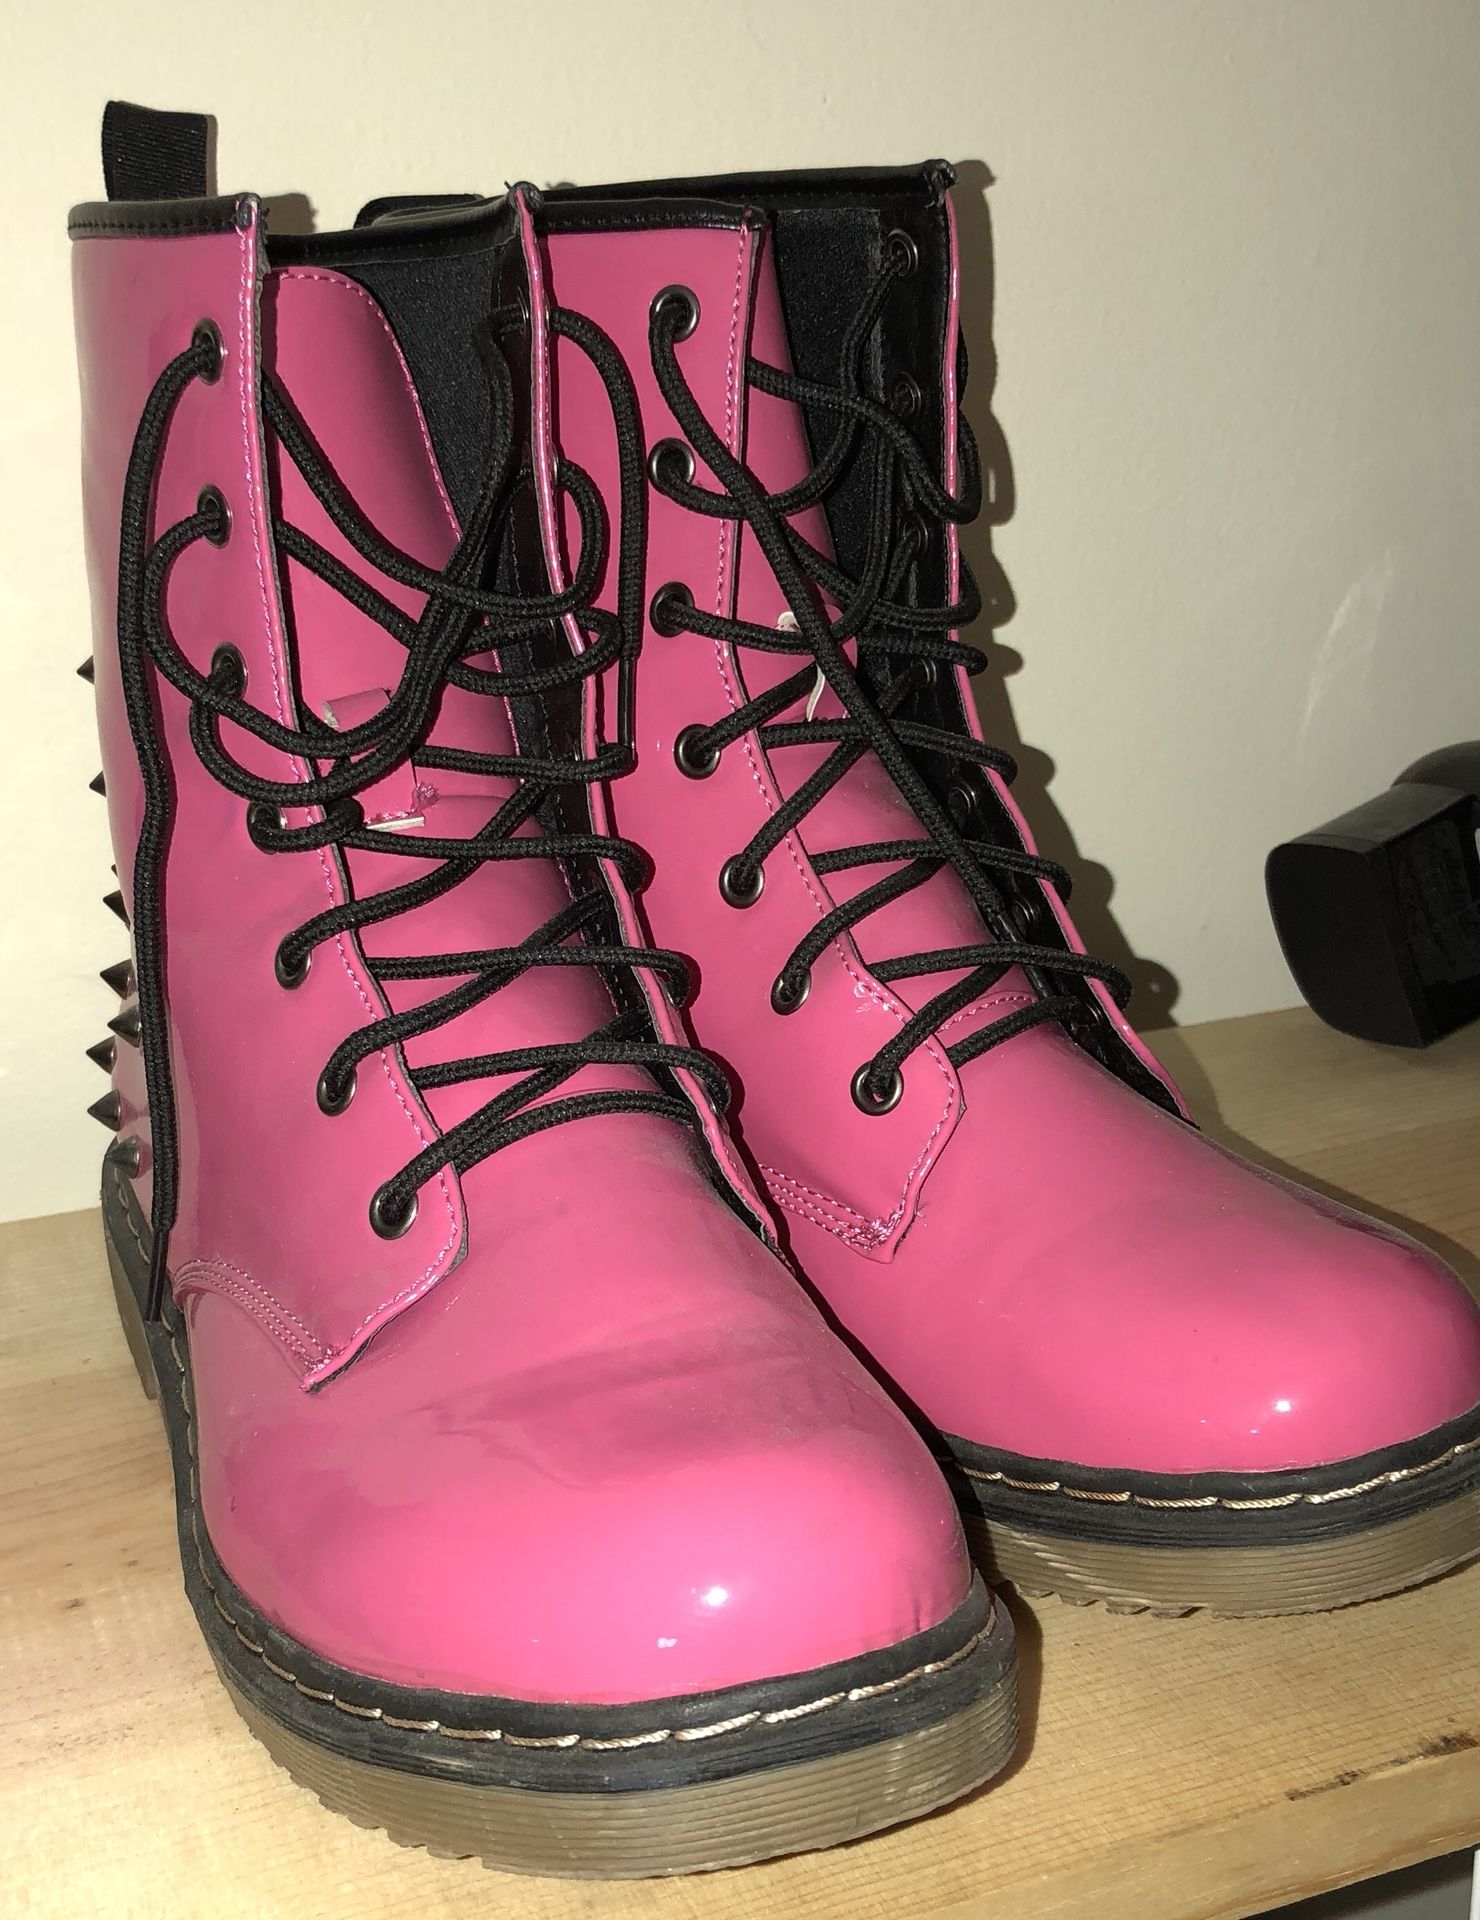 Size 11M Neon pink combat boots